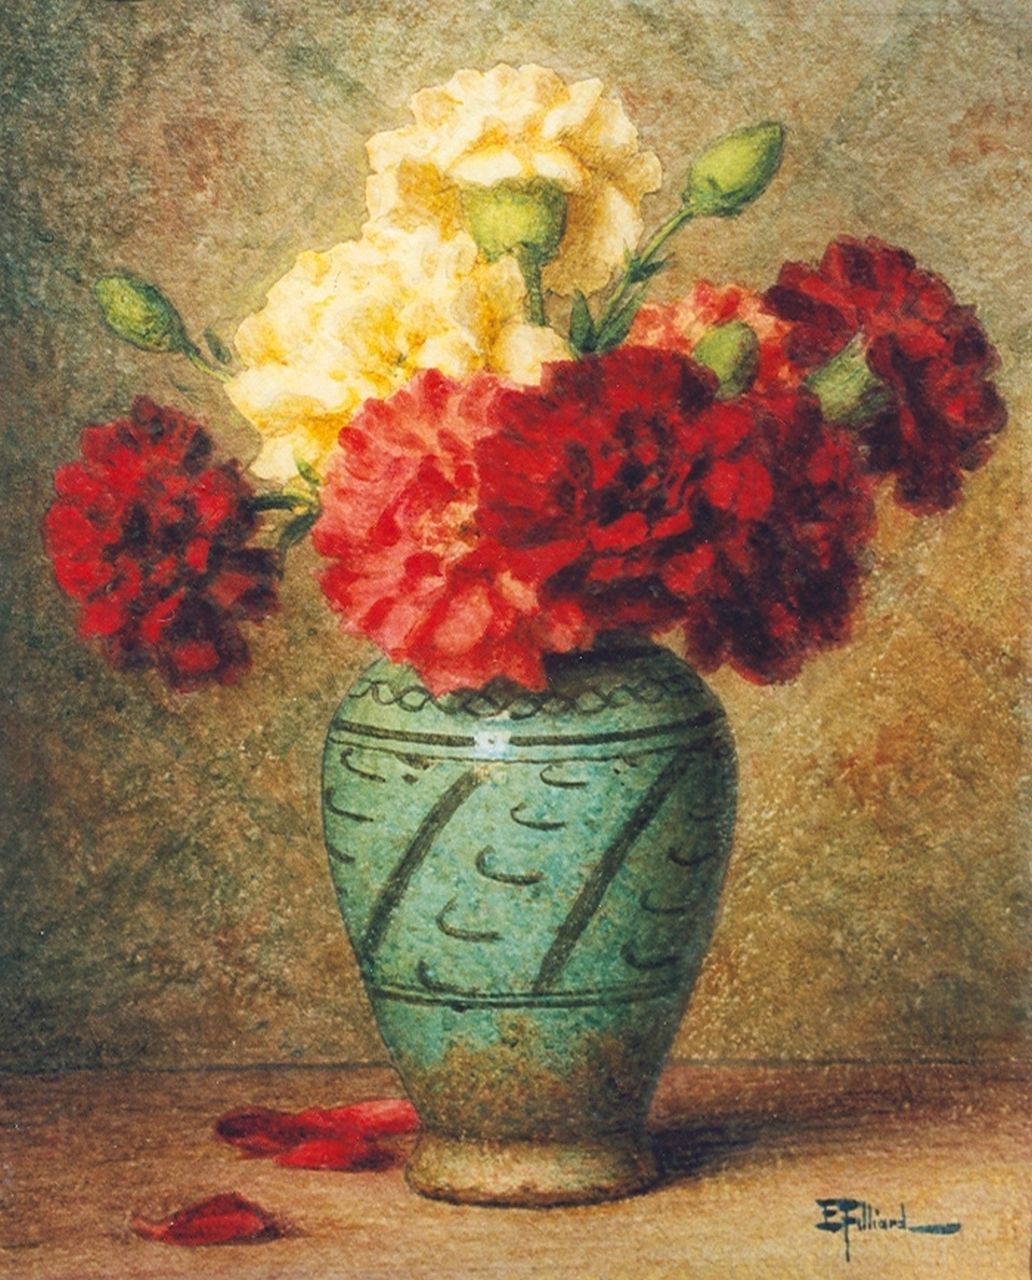 Filliard E.  | Ernest Filliard, Still life with carnations in a vase, Aquarell auf Papier 35,7 x 28,7 cm, signed l.r.